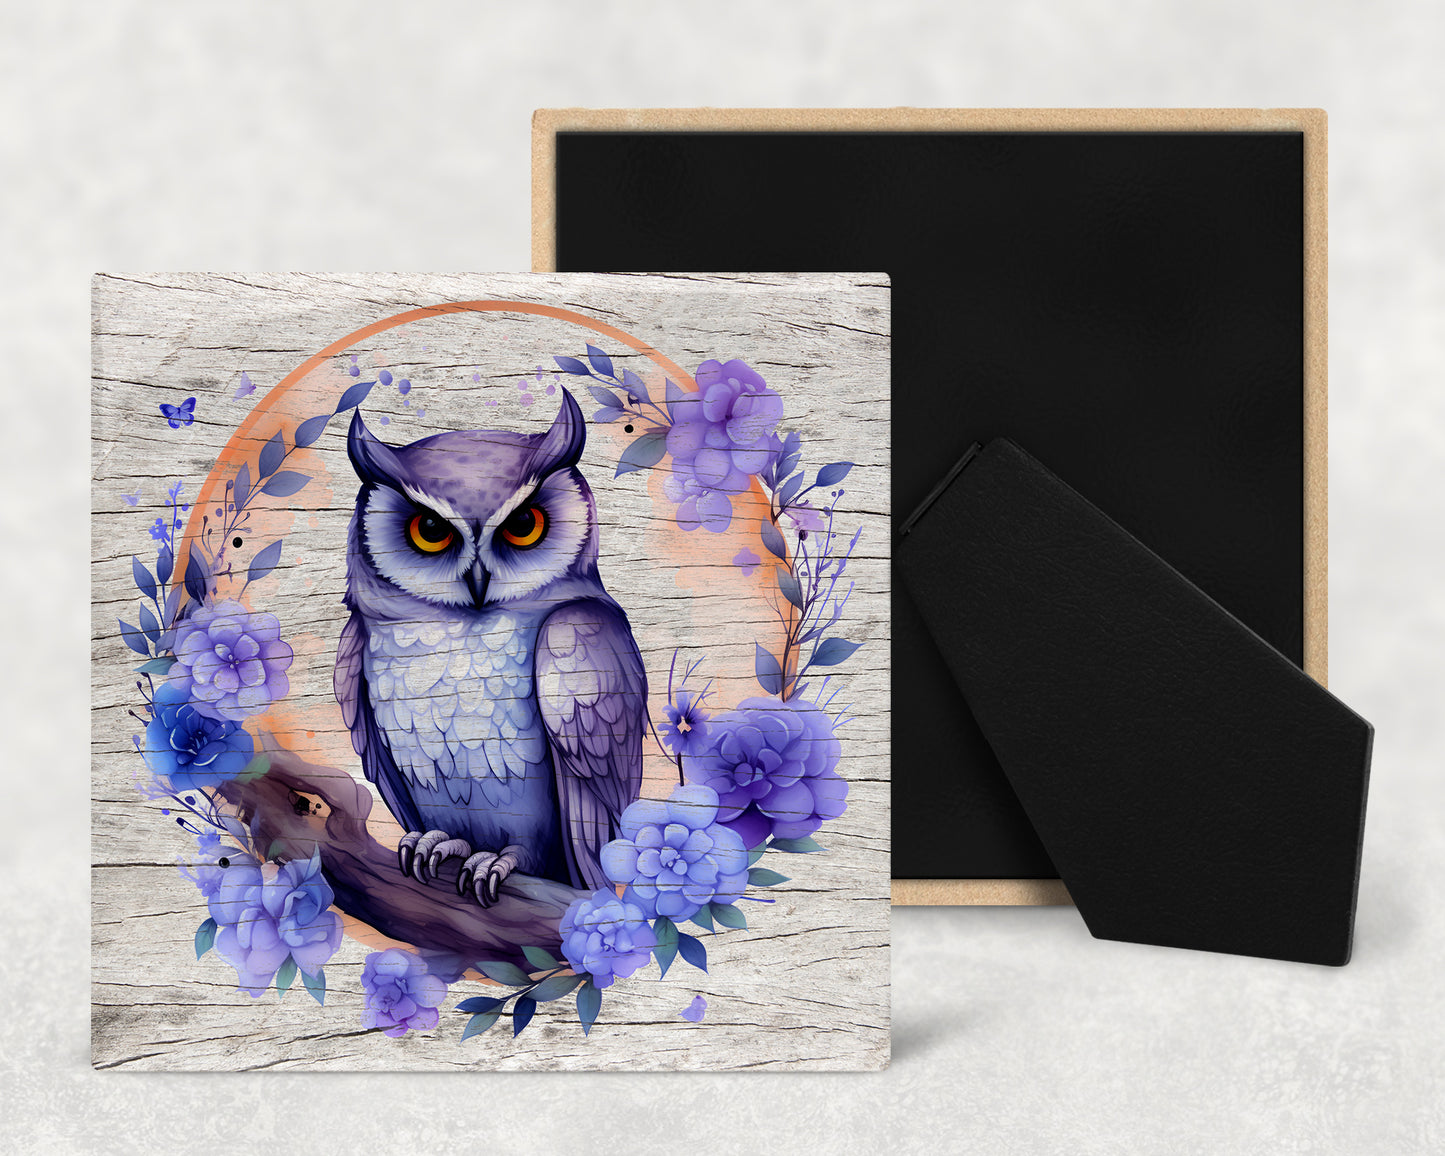 Watercolor Owl on Wood Texture Art Decorative Ceramic Tile with Optional Easel Back - Available in 3 Sizes